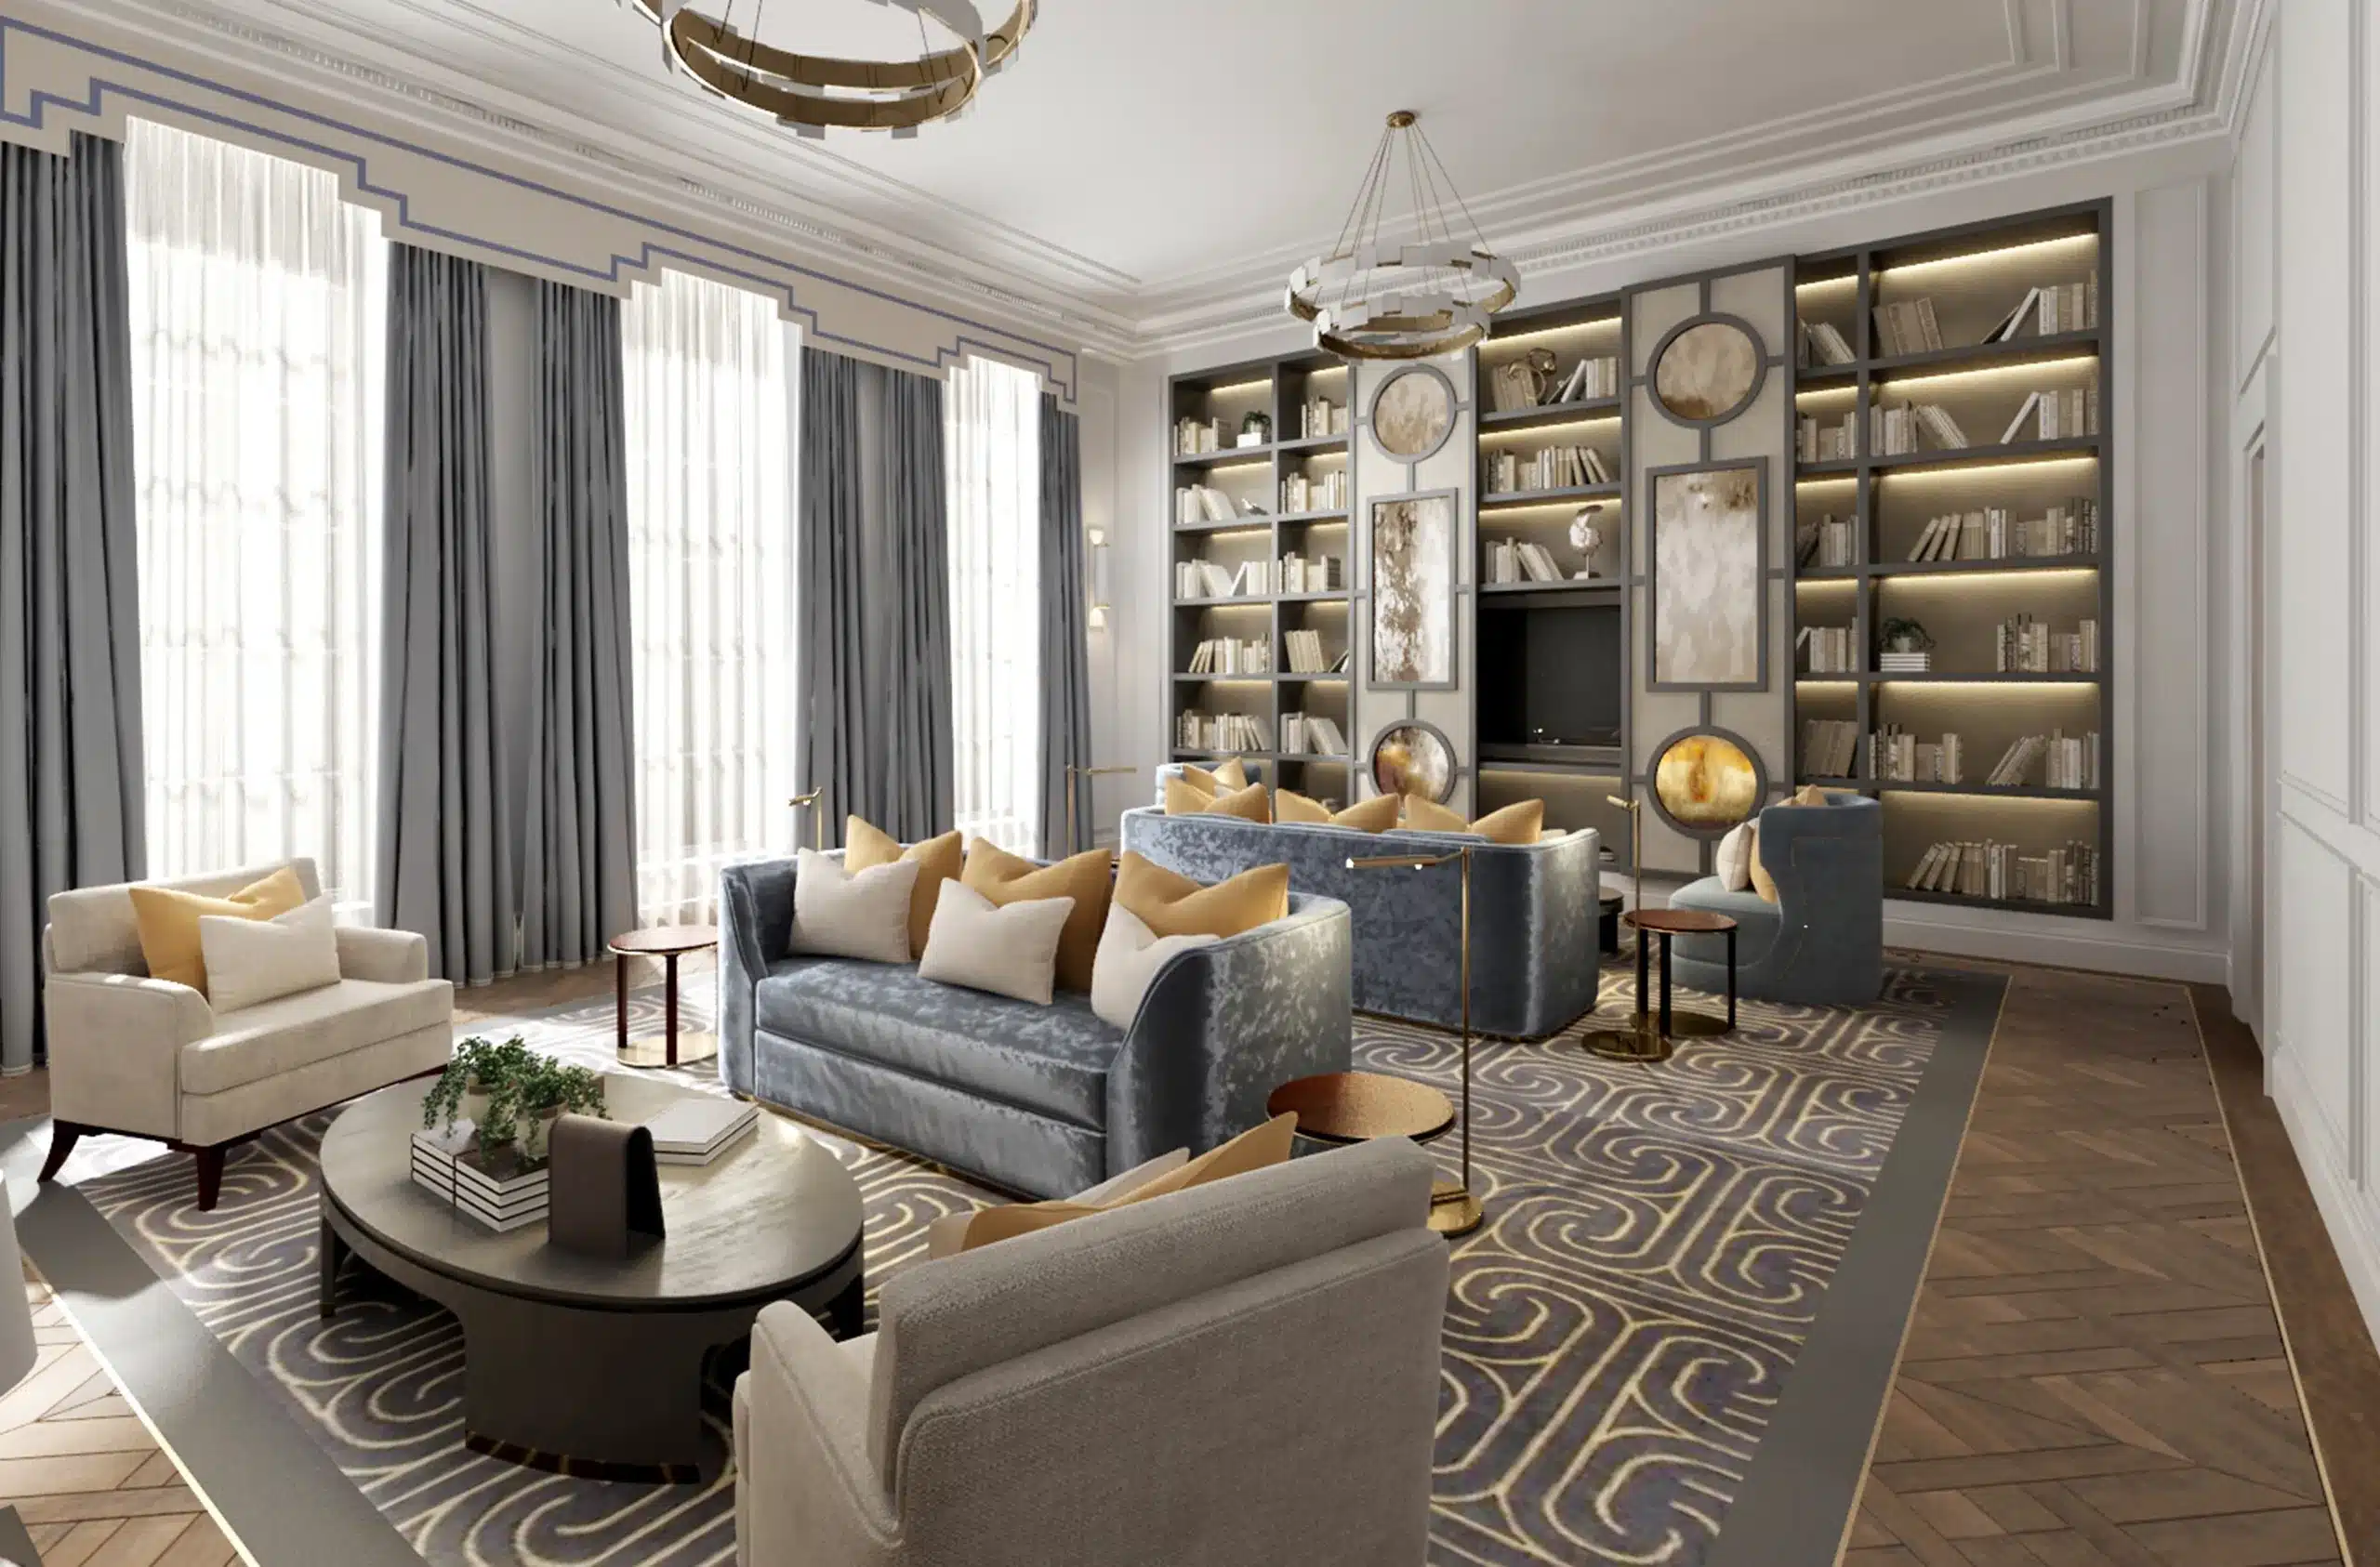 A loungeroom in an interior design project completed by katharine pooleys london based studio